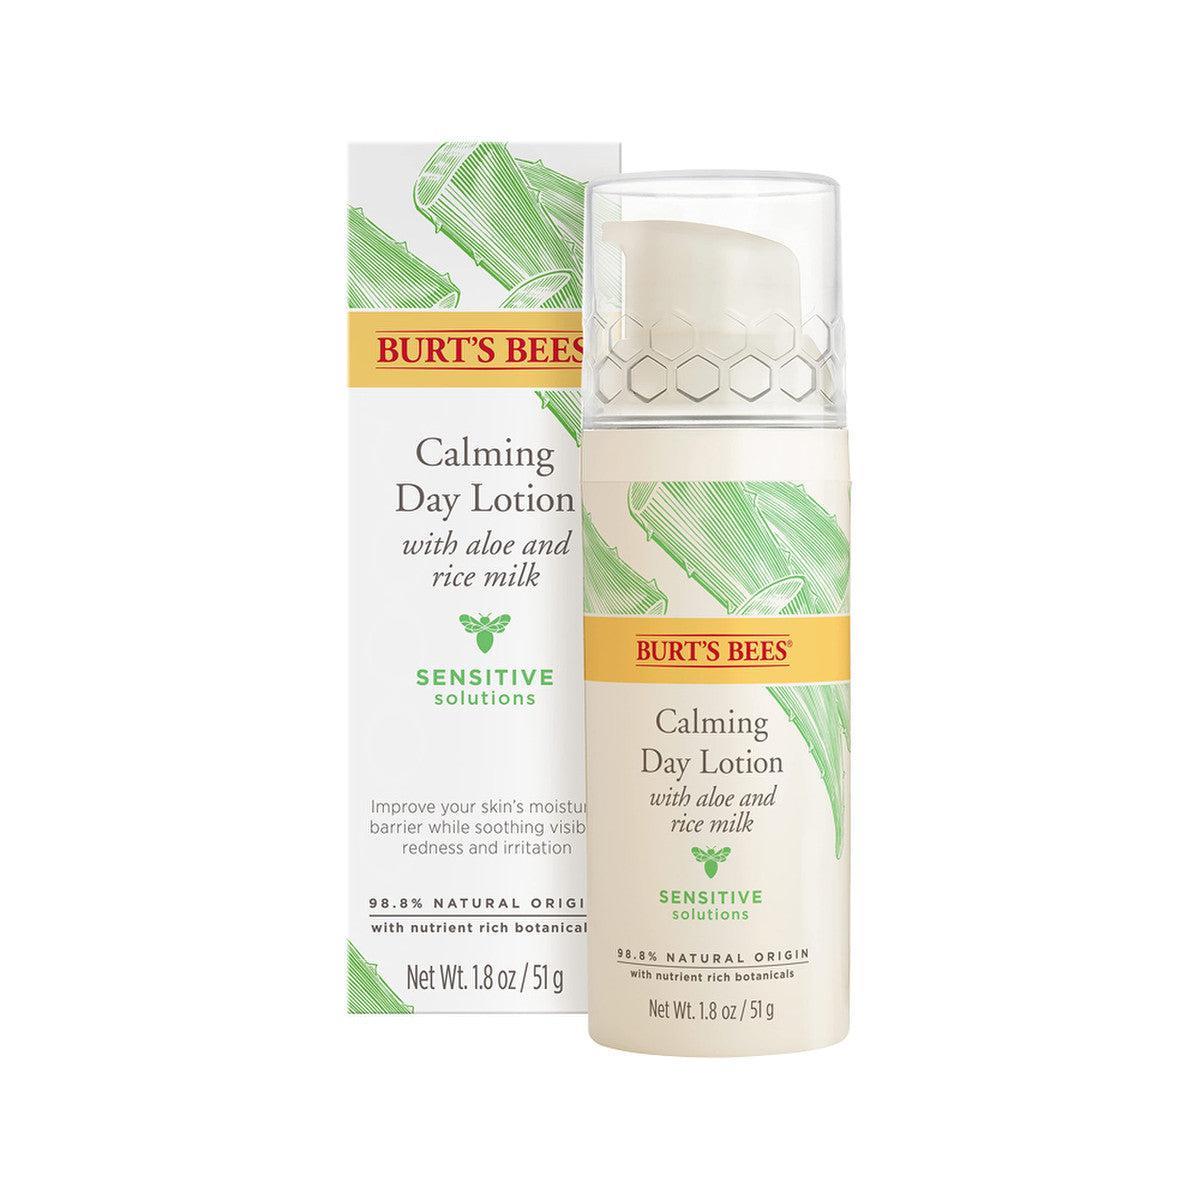 Burt's Bees Sensitive Solutions Calming Day Lotion 50g